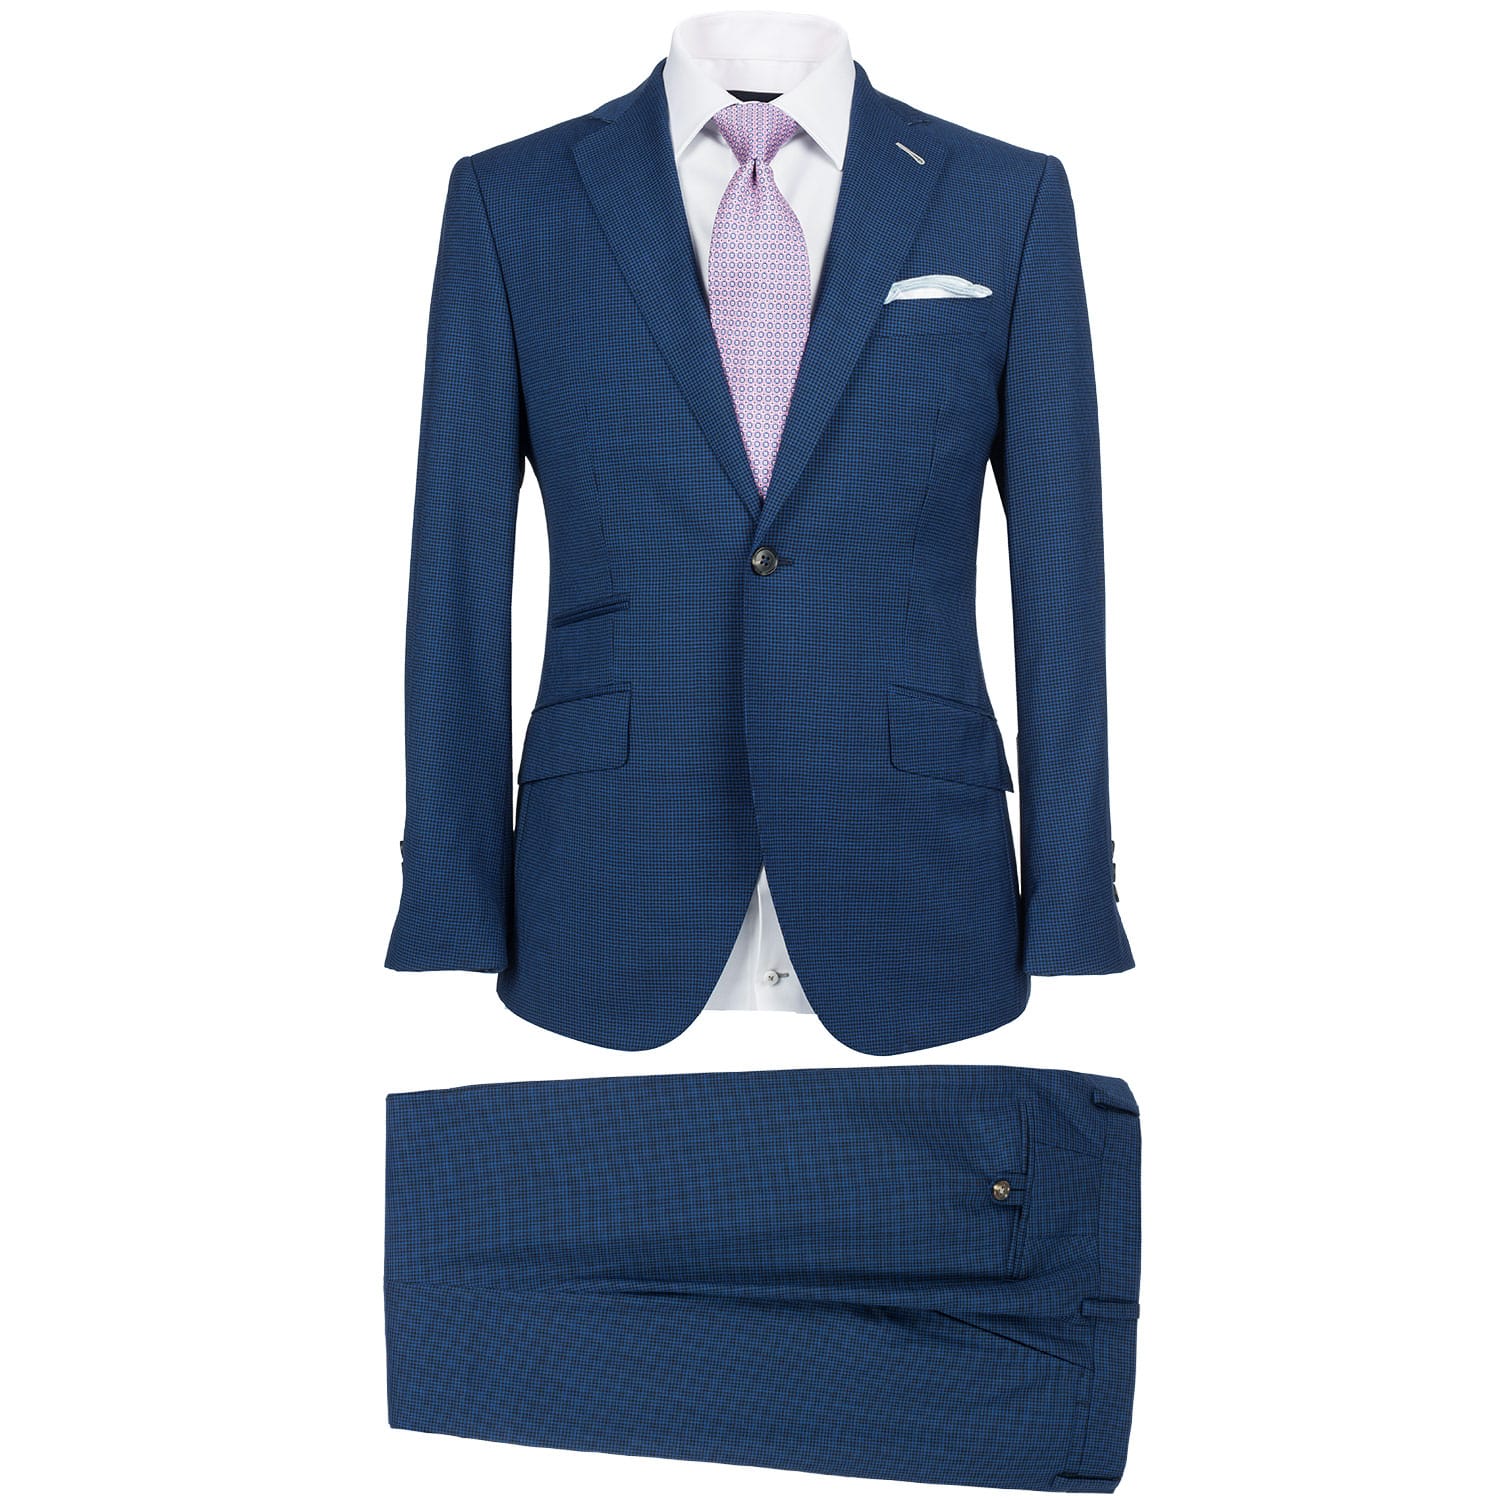 How to Choose a Cashmere Wool Suit – StudioSuits